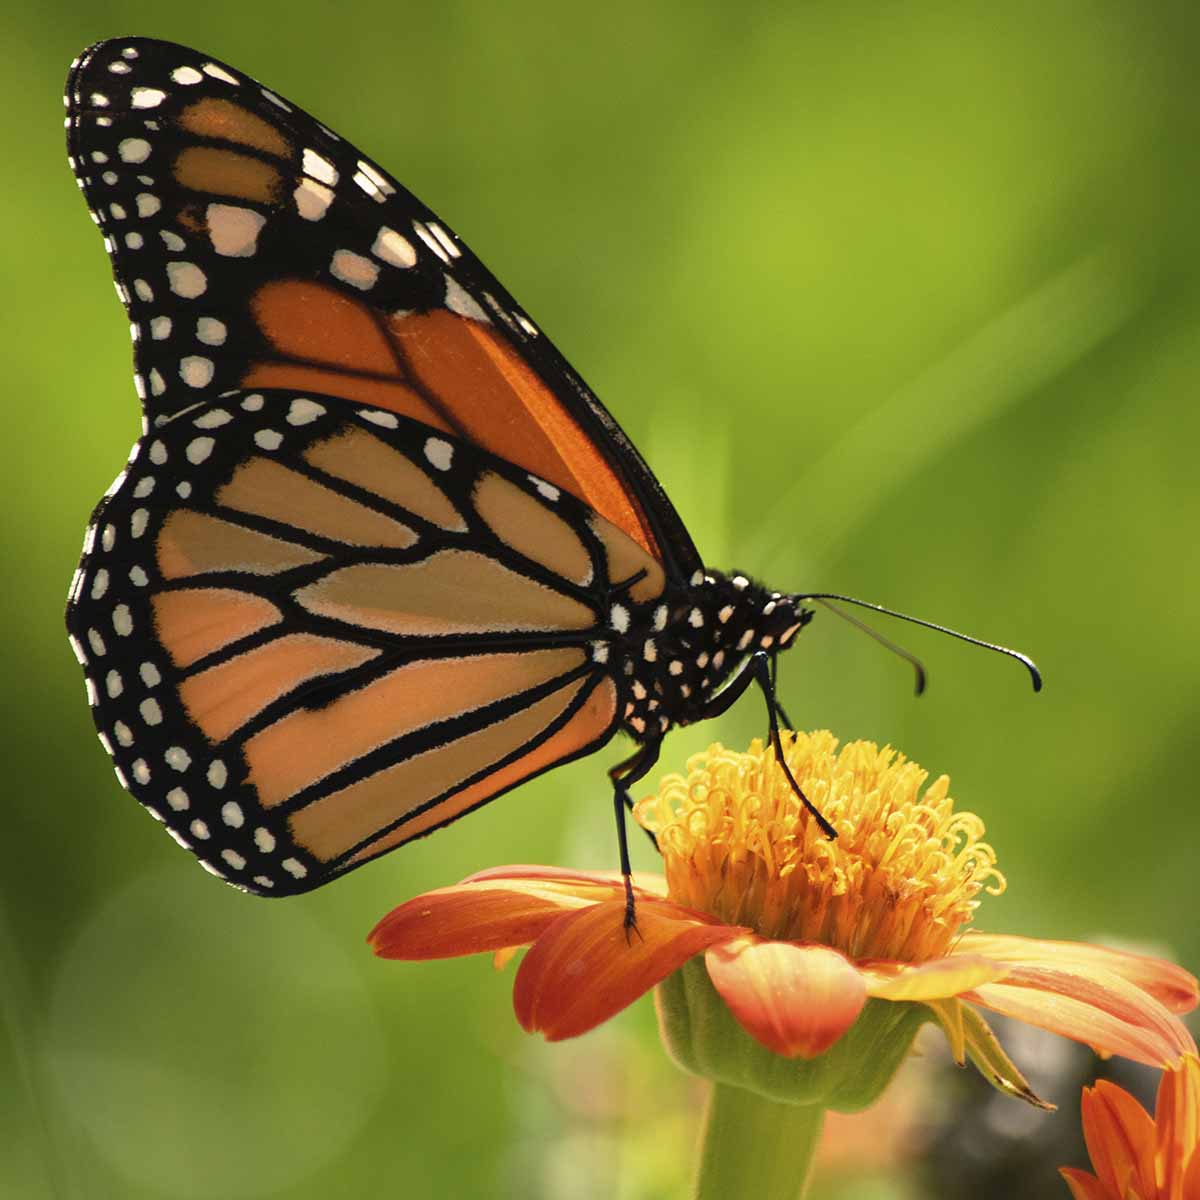 A orange, black, with white spots butterfly on flower